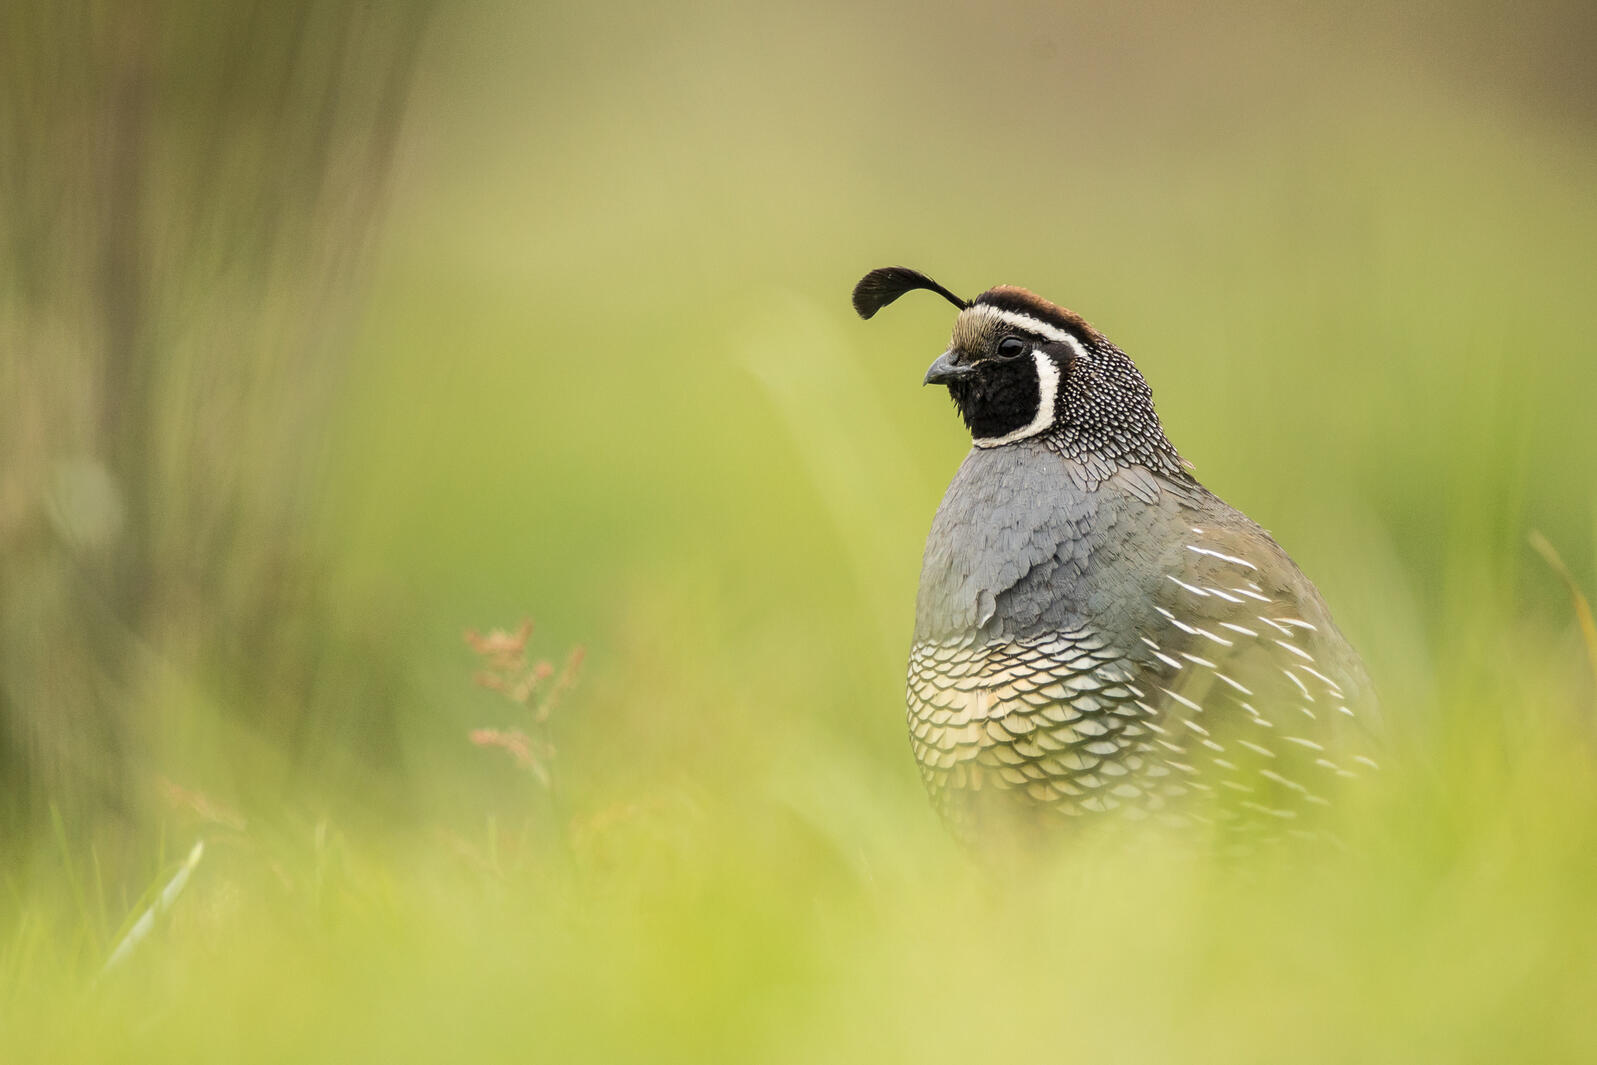 An iconic California Quail strikes a pose, with the vibrant grass providing a colorful frame.